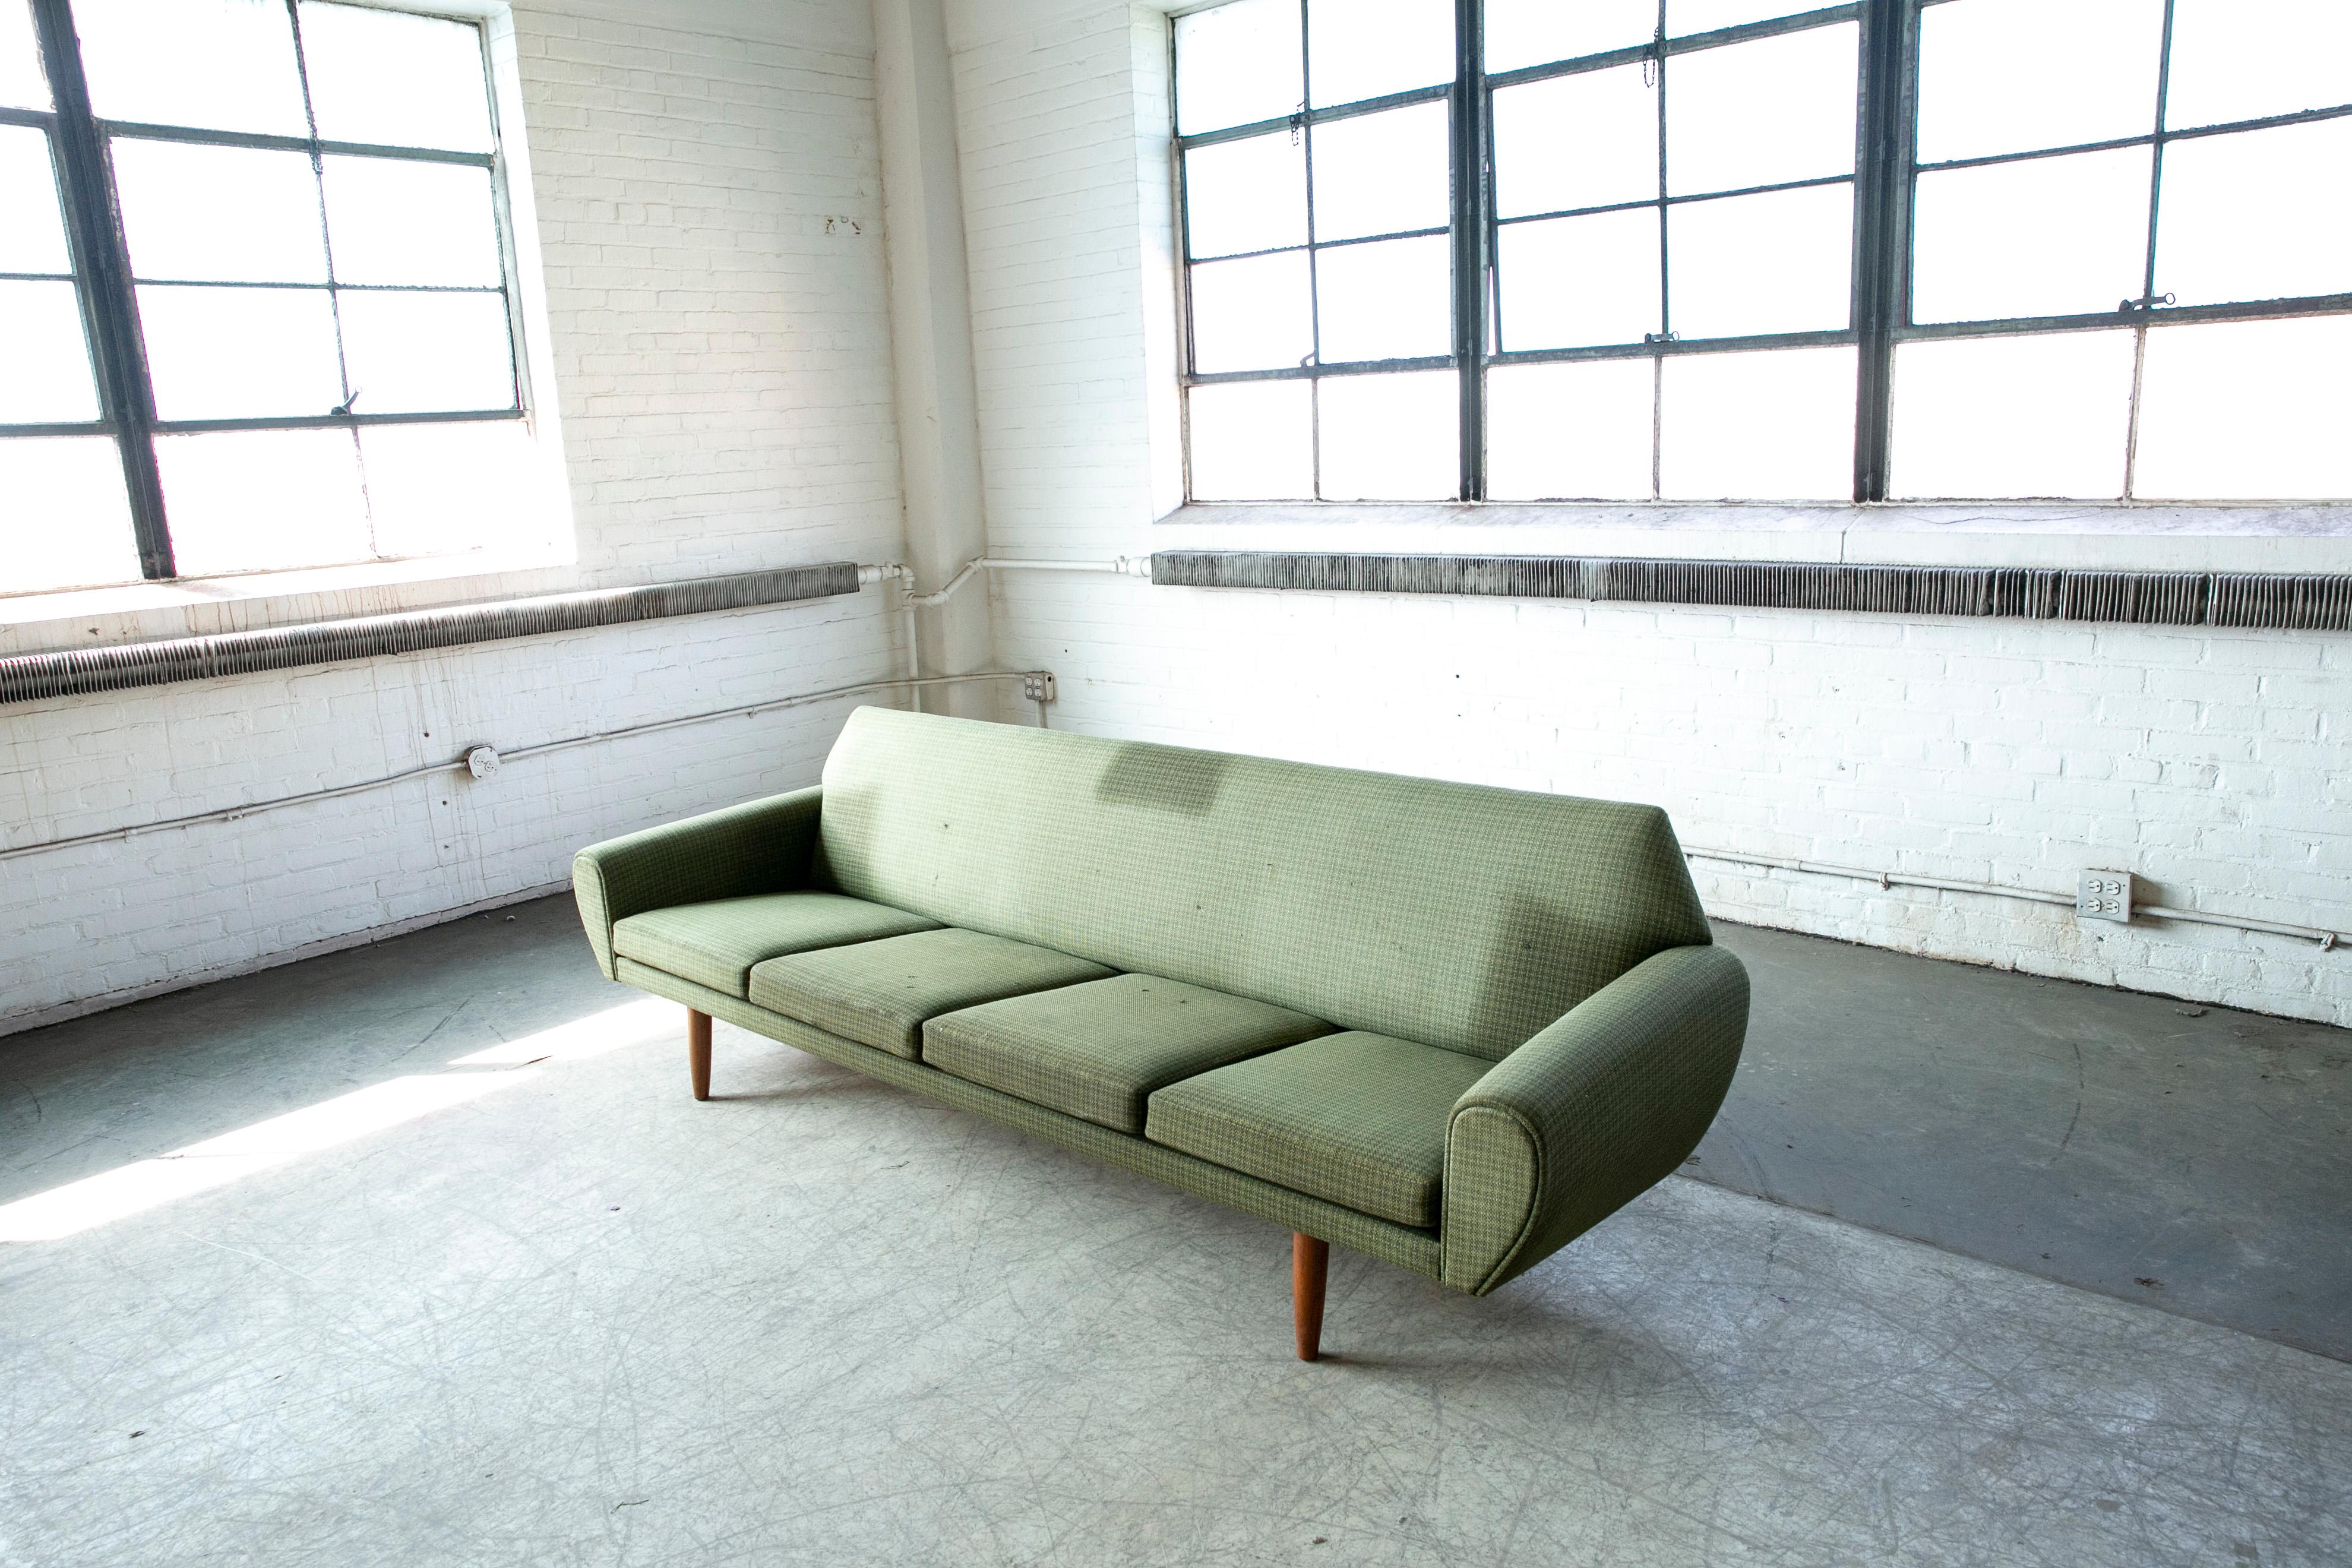 Amazing sofa sleek organic design lines and just the epitome of the best the Danish designers of the 1960s had to offer. Some of these fantastic designs were in many ways the last hooray for Danish modern before the styles started to change